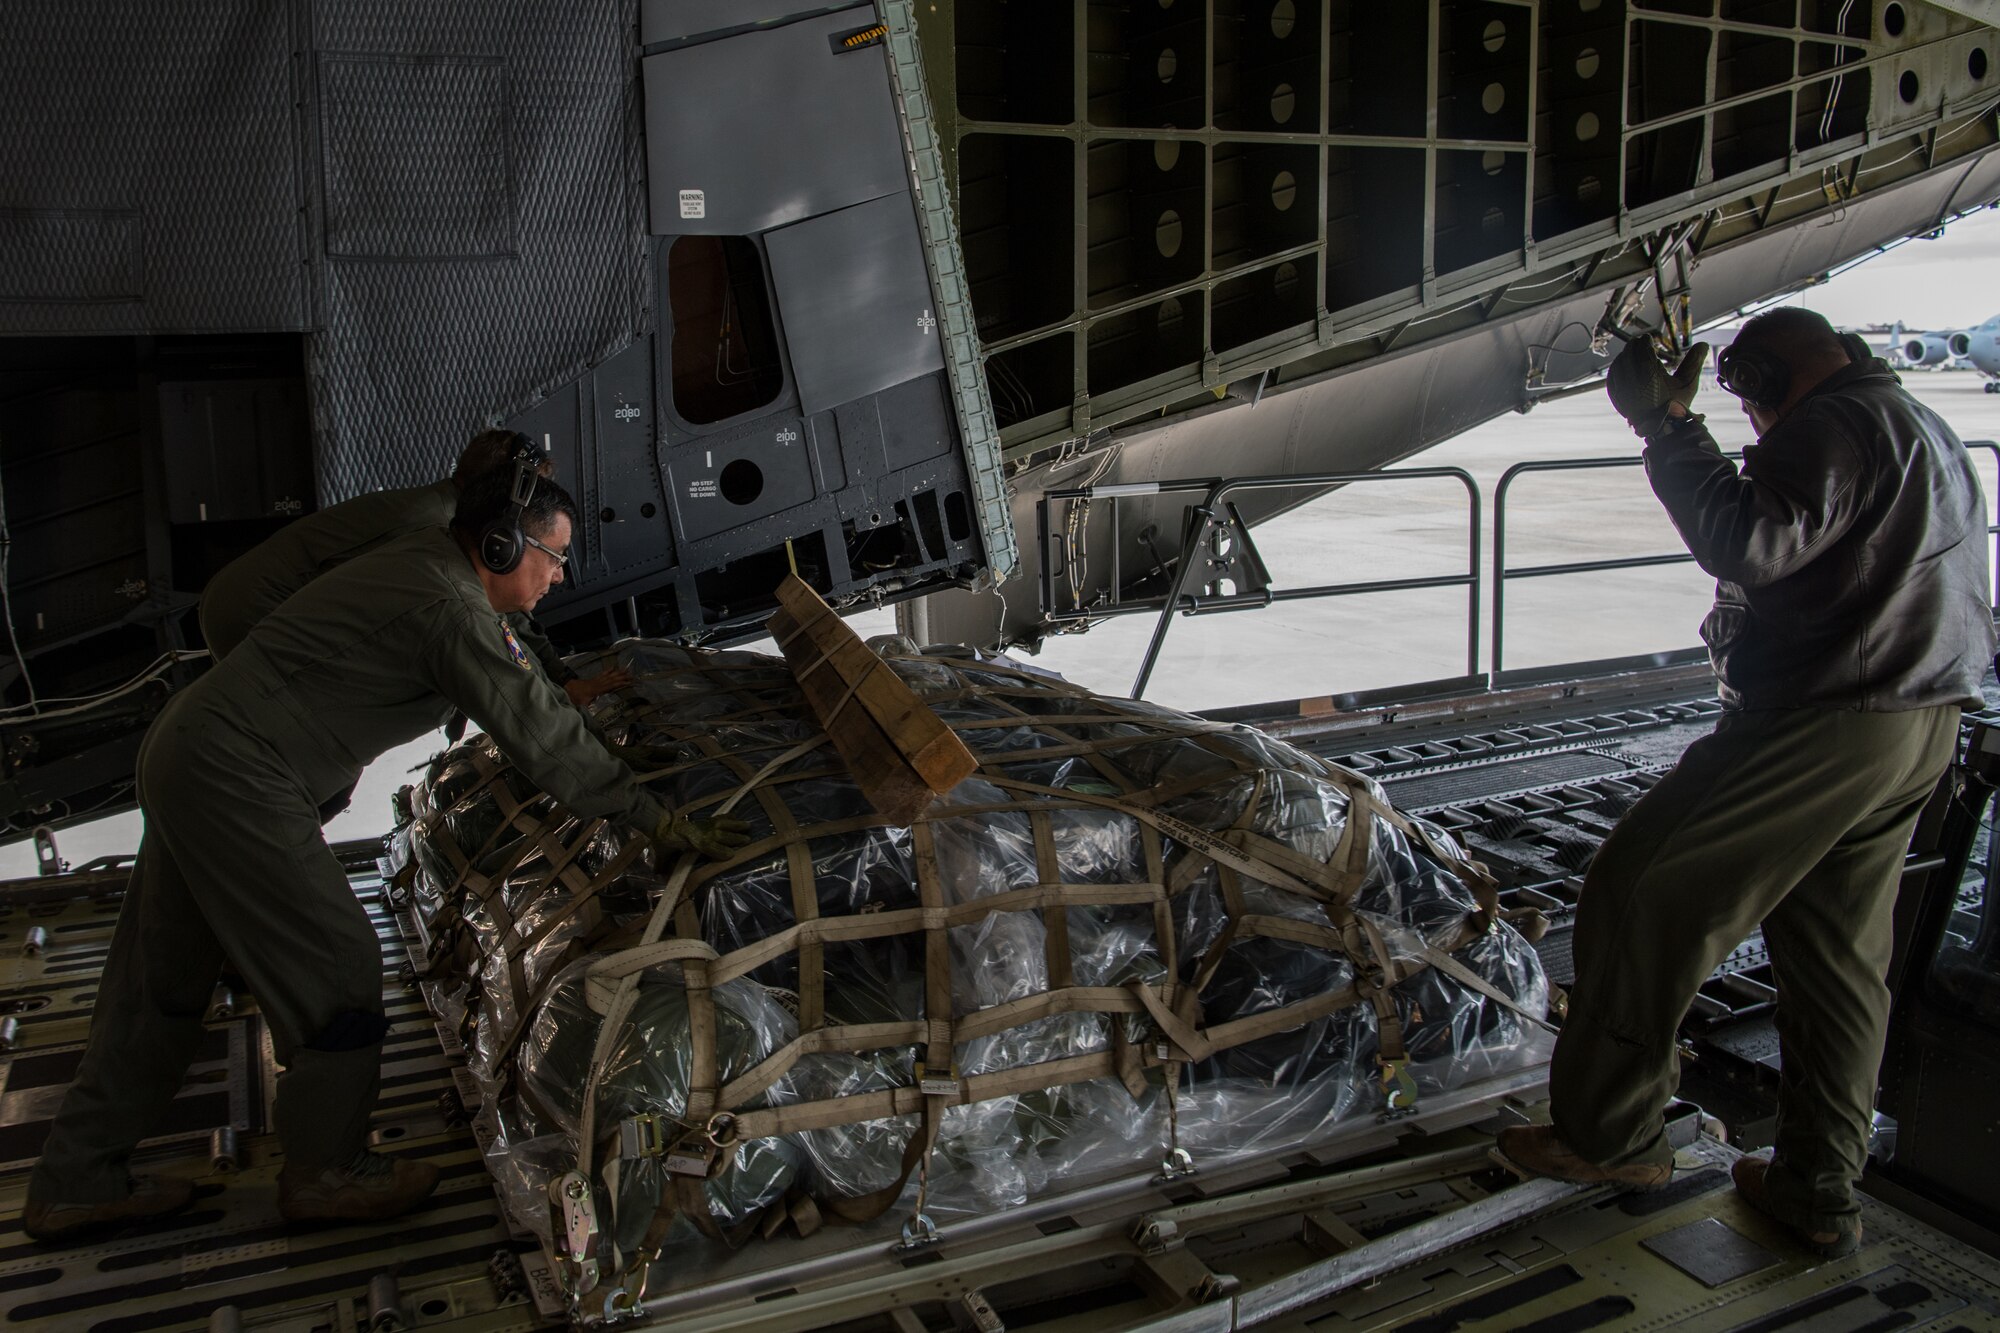 U.S. Reserve Citizen Airmen with the 433rd Airlift Wing’s 68th Airlift Squadron, offload cargo belonging to medical personnel who are supporting the residents of New York City in the fight against COVID-19, at Joint Base McGuire-Dix-Lakehurst, N.J., April 5, 2020.